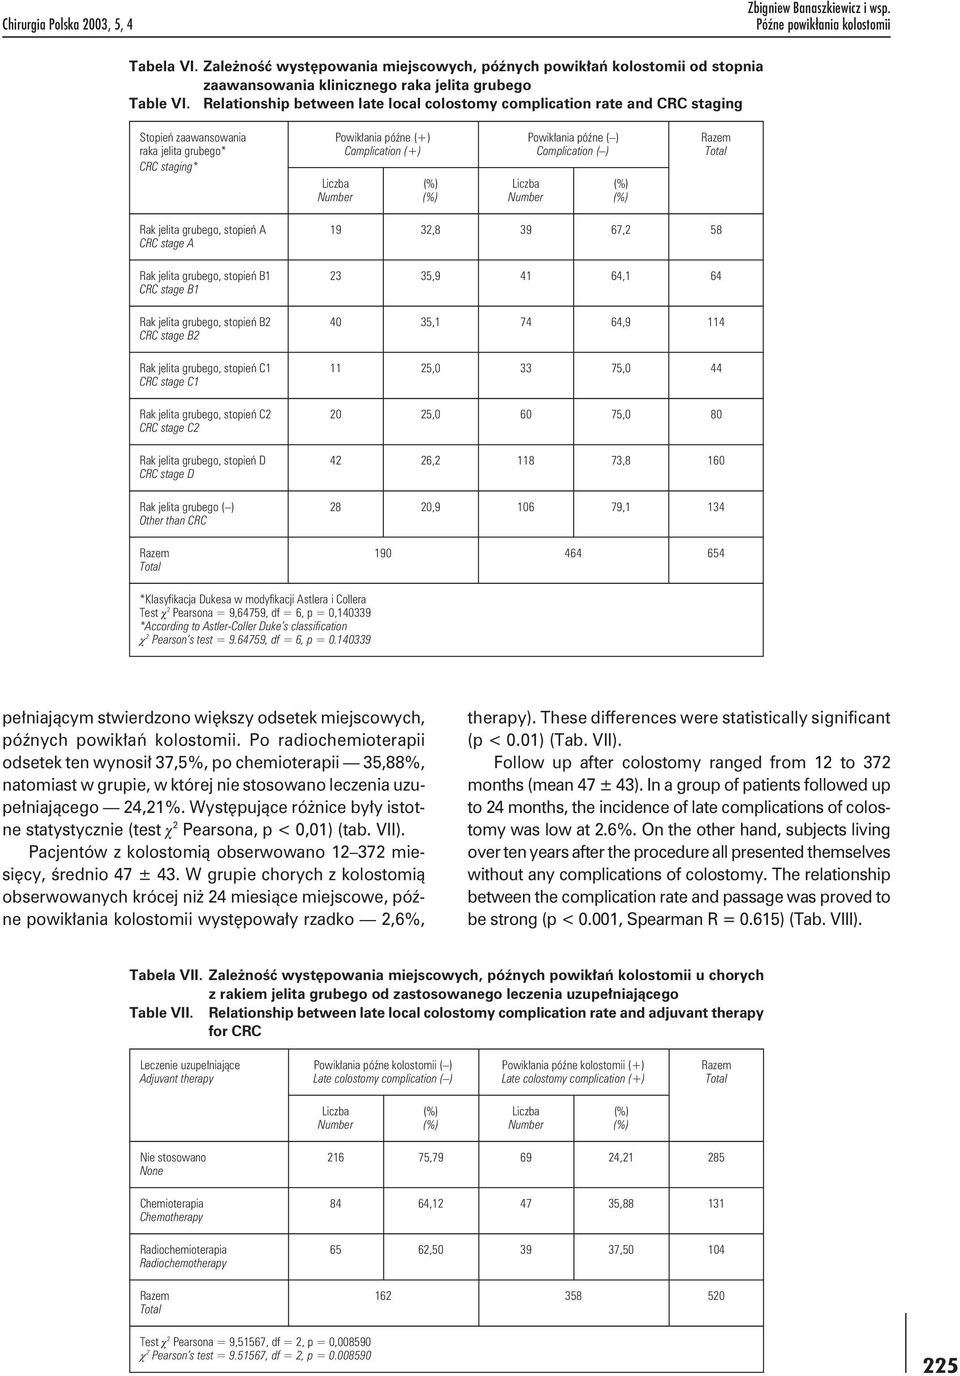 Relationship between late local colostomy complication rate and CRC staging Stopień zaawansowania Powikłania późne (+) Powikłania późne ( ) Razem raka jelita grubego* Complication (+) Complication (